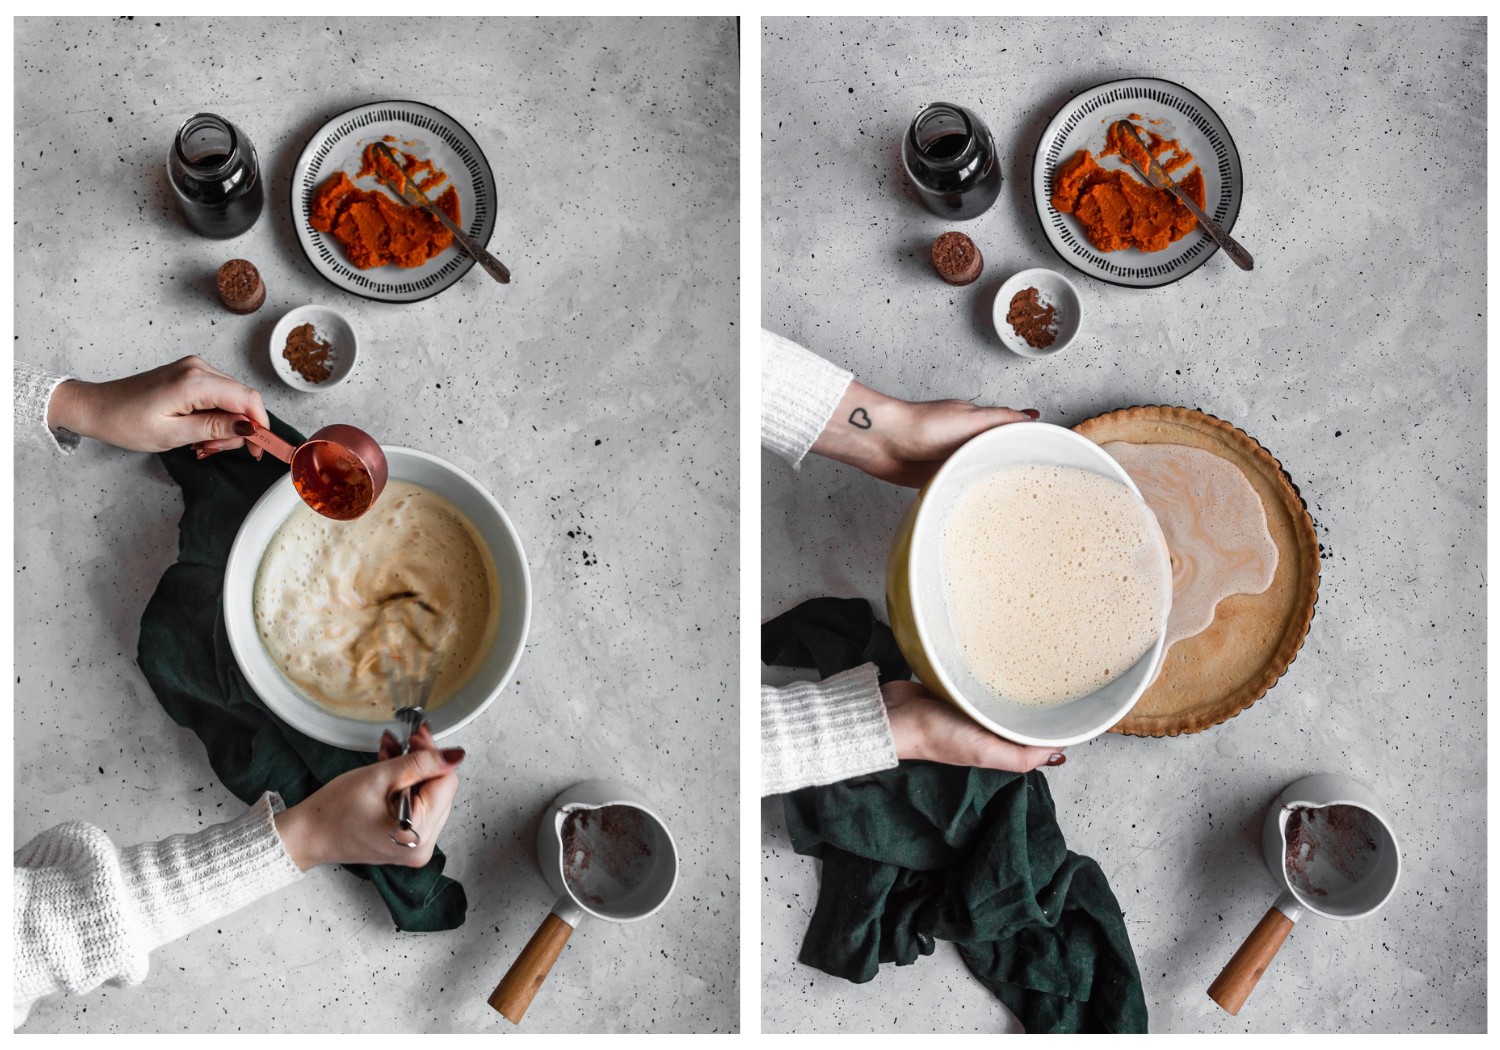 Two images of a woman's hands making a tart. On the left the woman's hands are mixing pumpkin into custard. On the right, the woman is pouring custard into a shortbread shell.